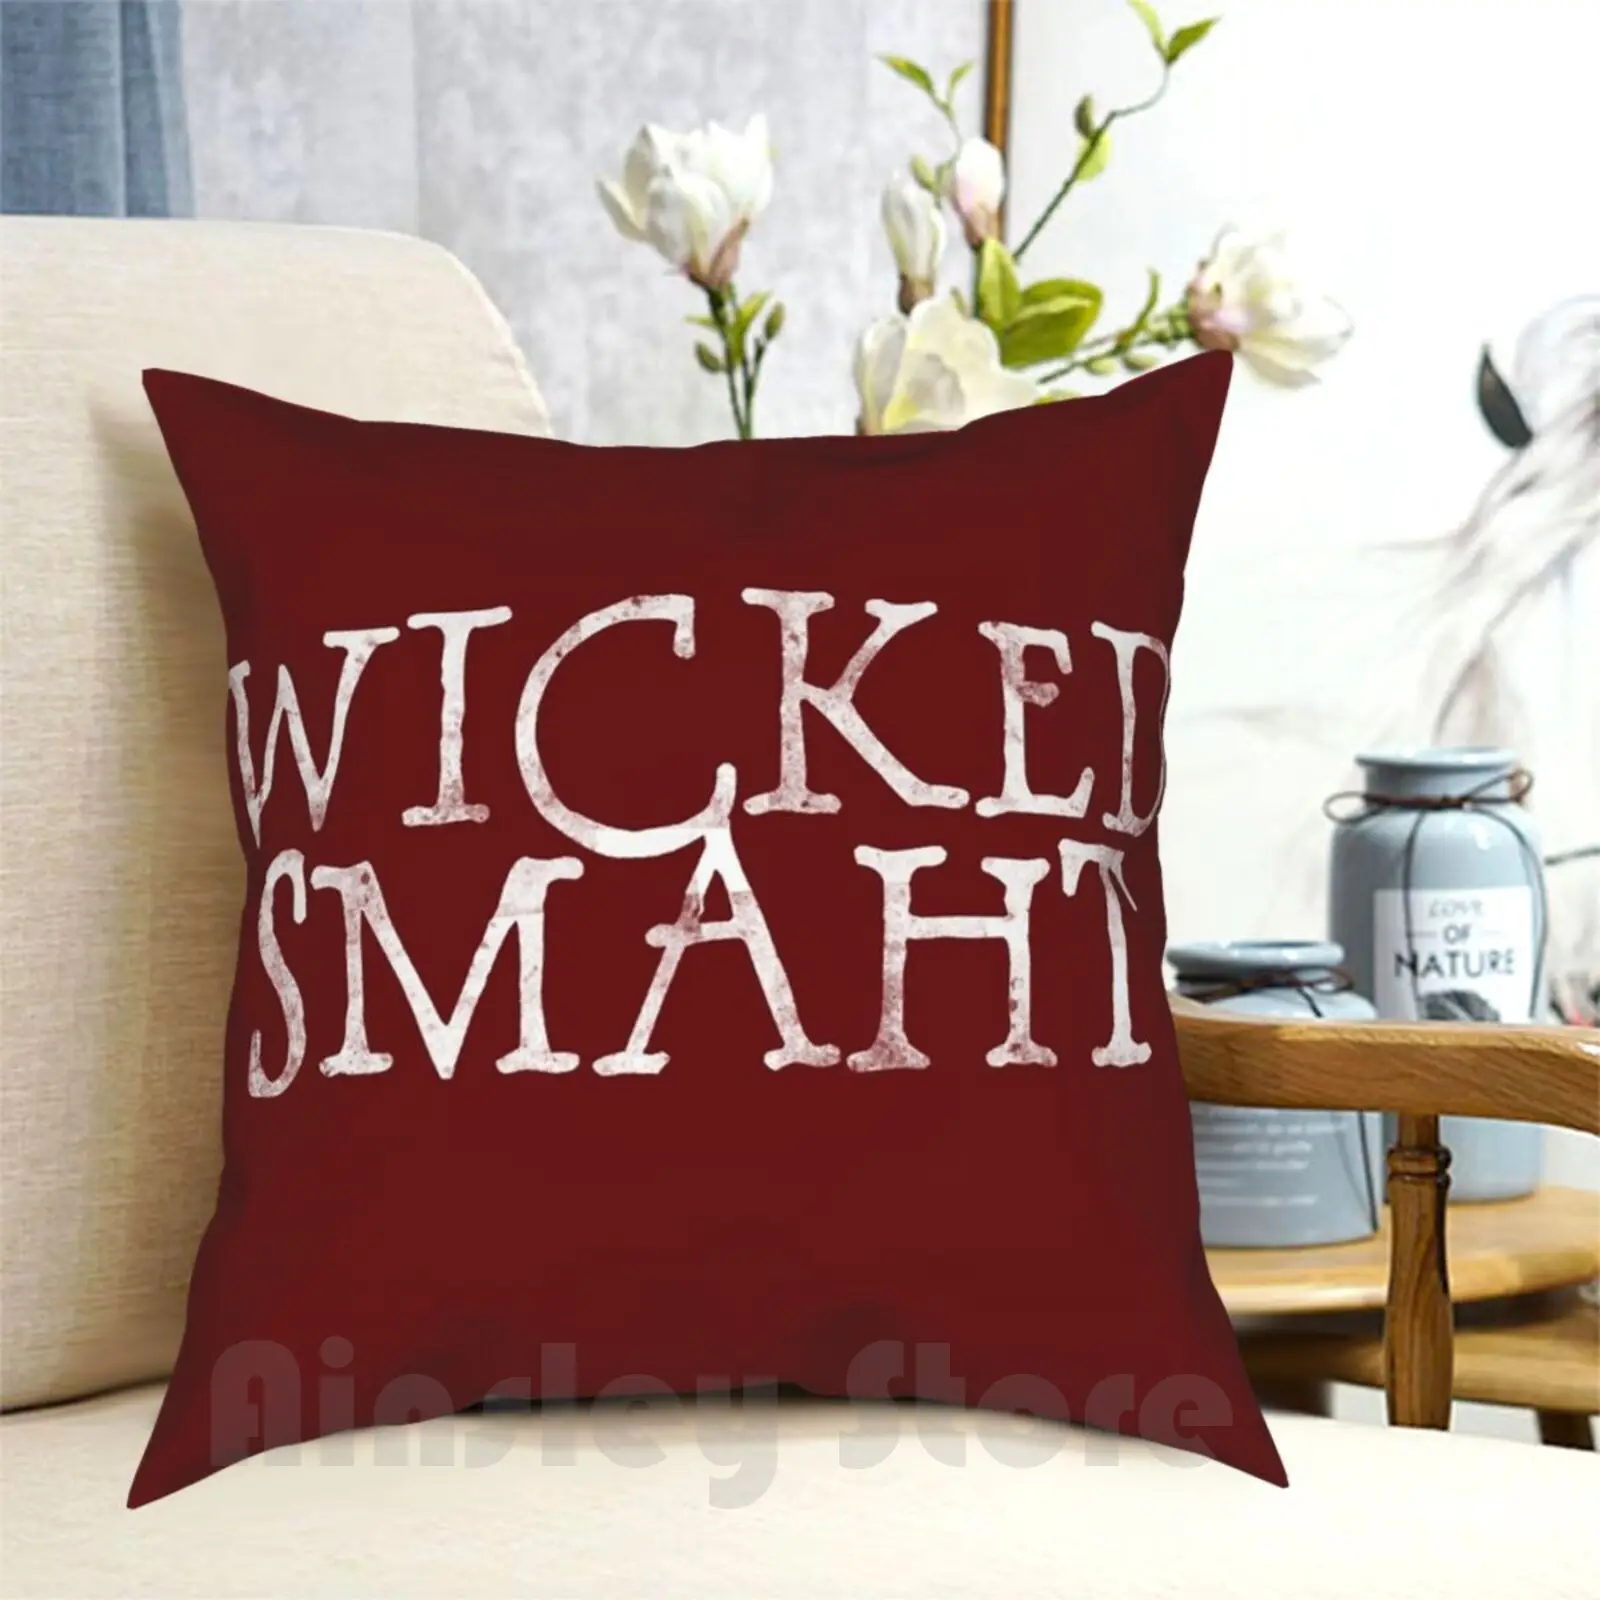 

Wicked Smaht Pillow Case Printed Home Soft Throw Pillow Wicked Smaht Boston Smart Intelligent Massachusetts Parody Funny